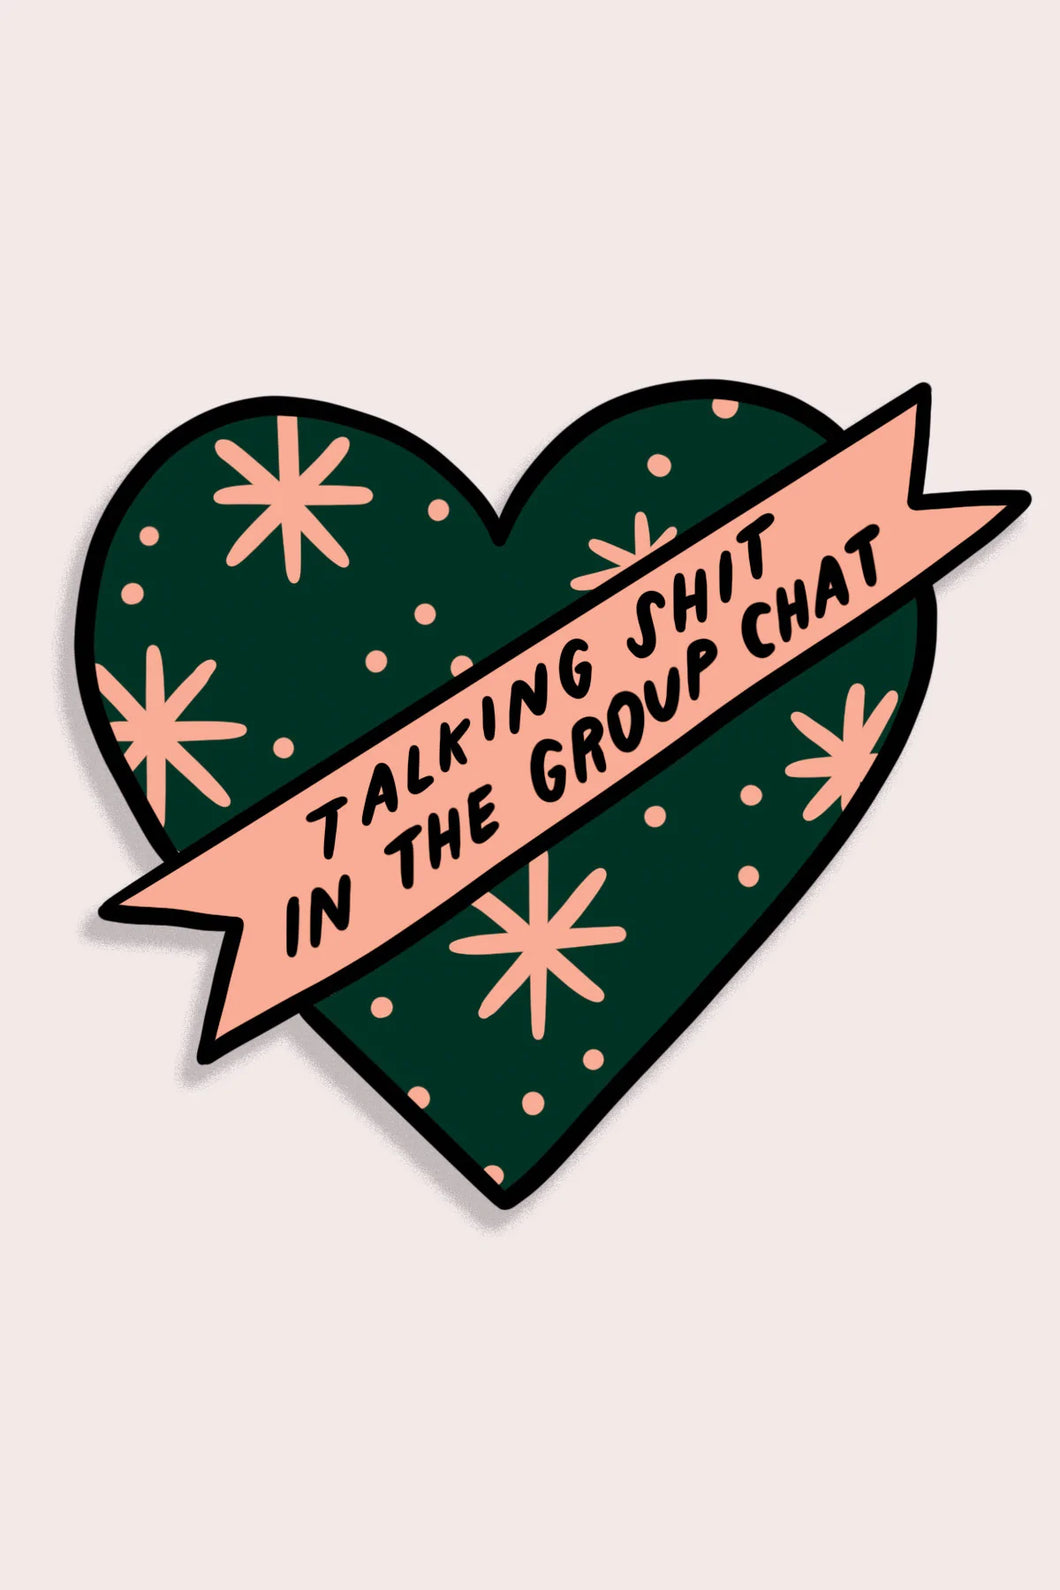 Group Chat Sticker